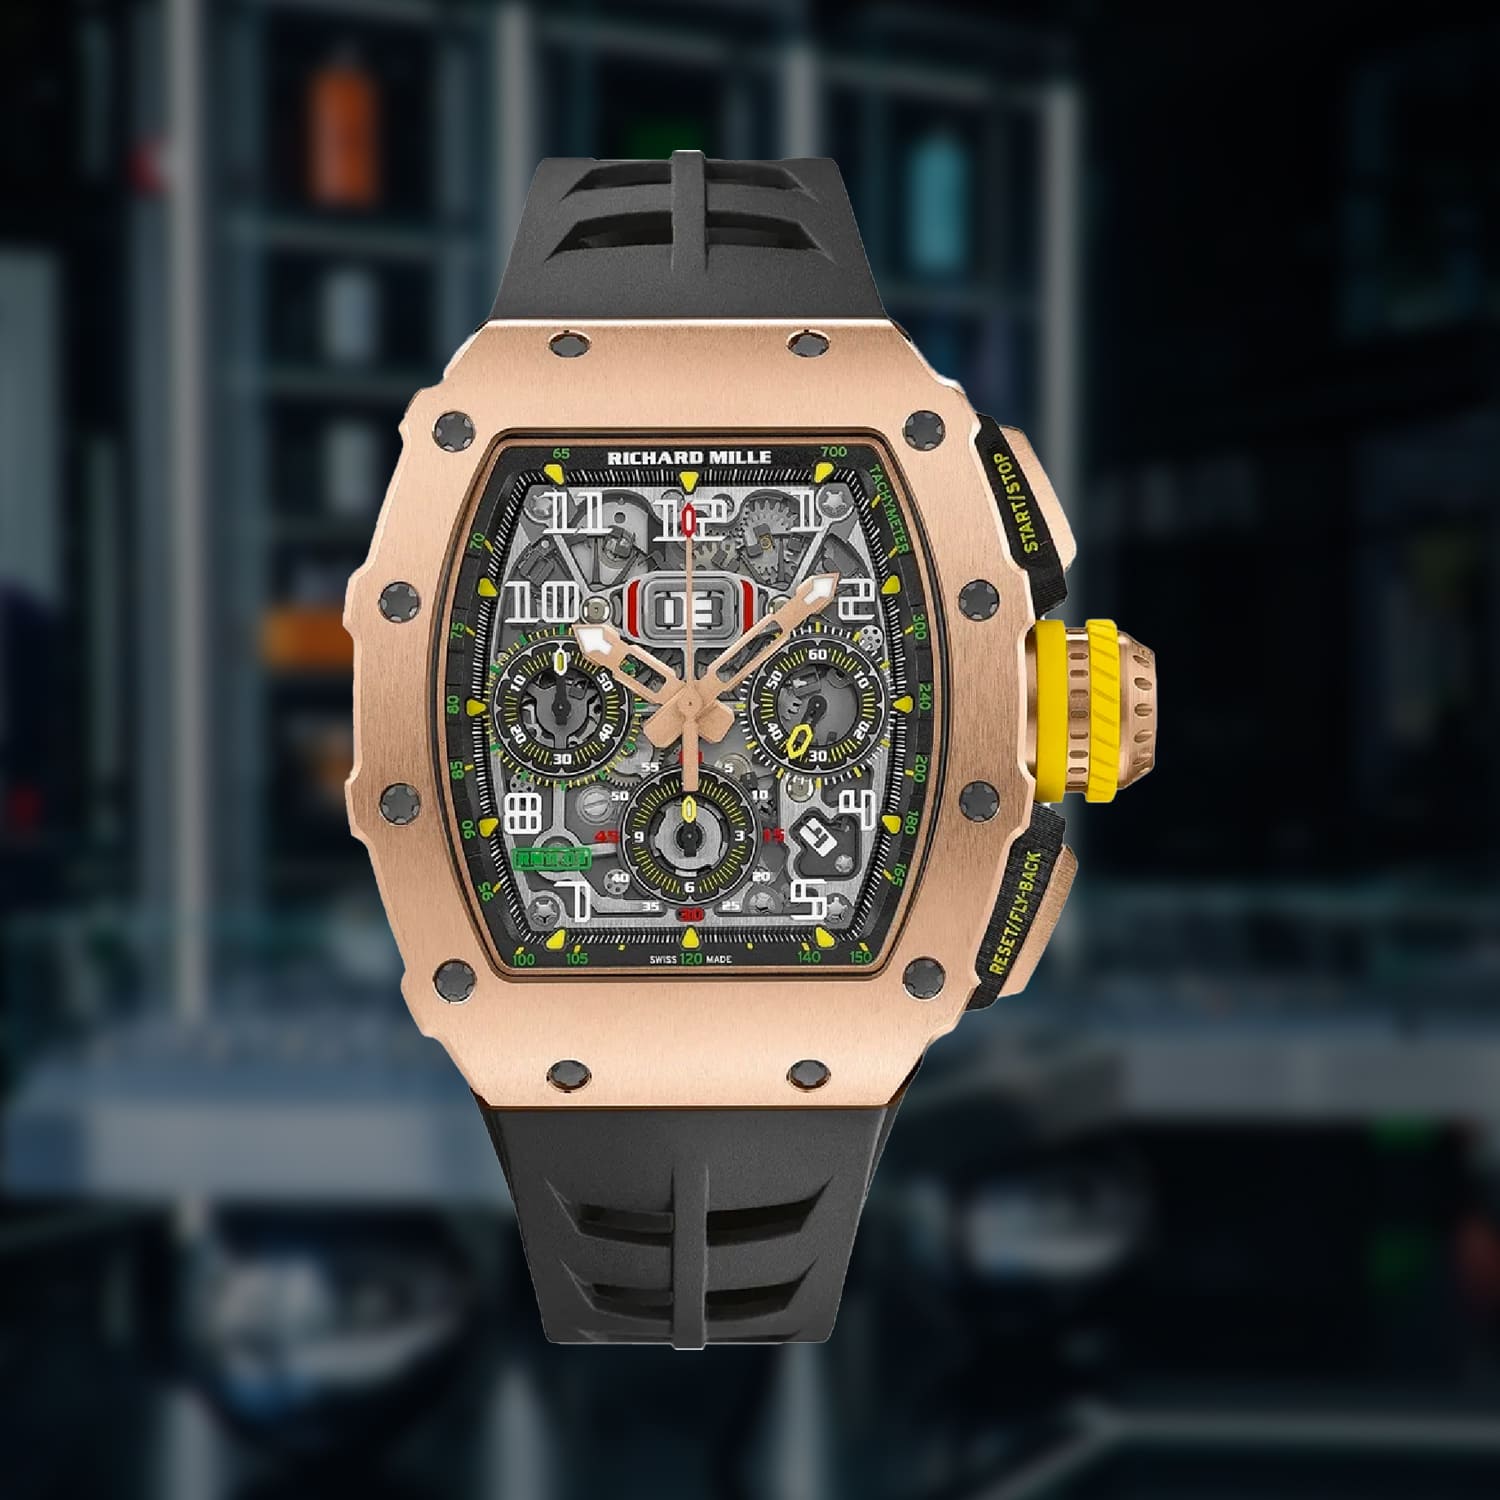 Richard Mille RM11-03 Automatic Flyback Chronograph | The Watch Meister